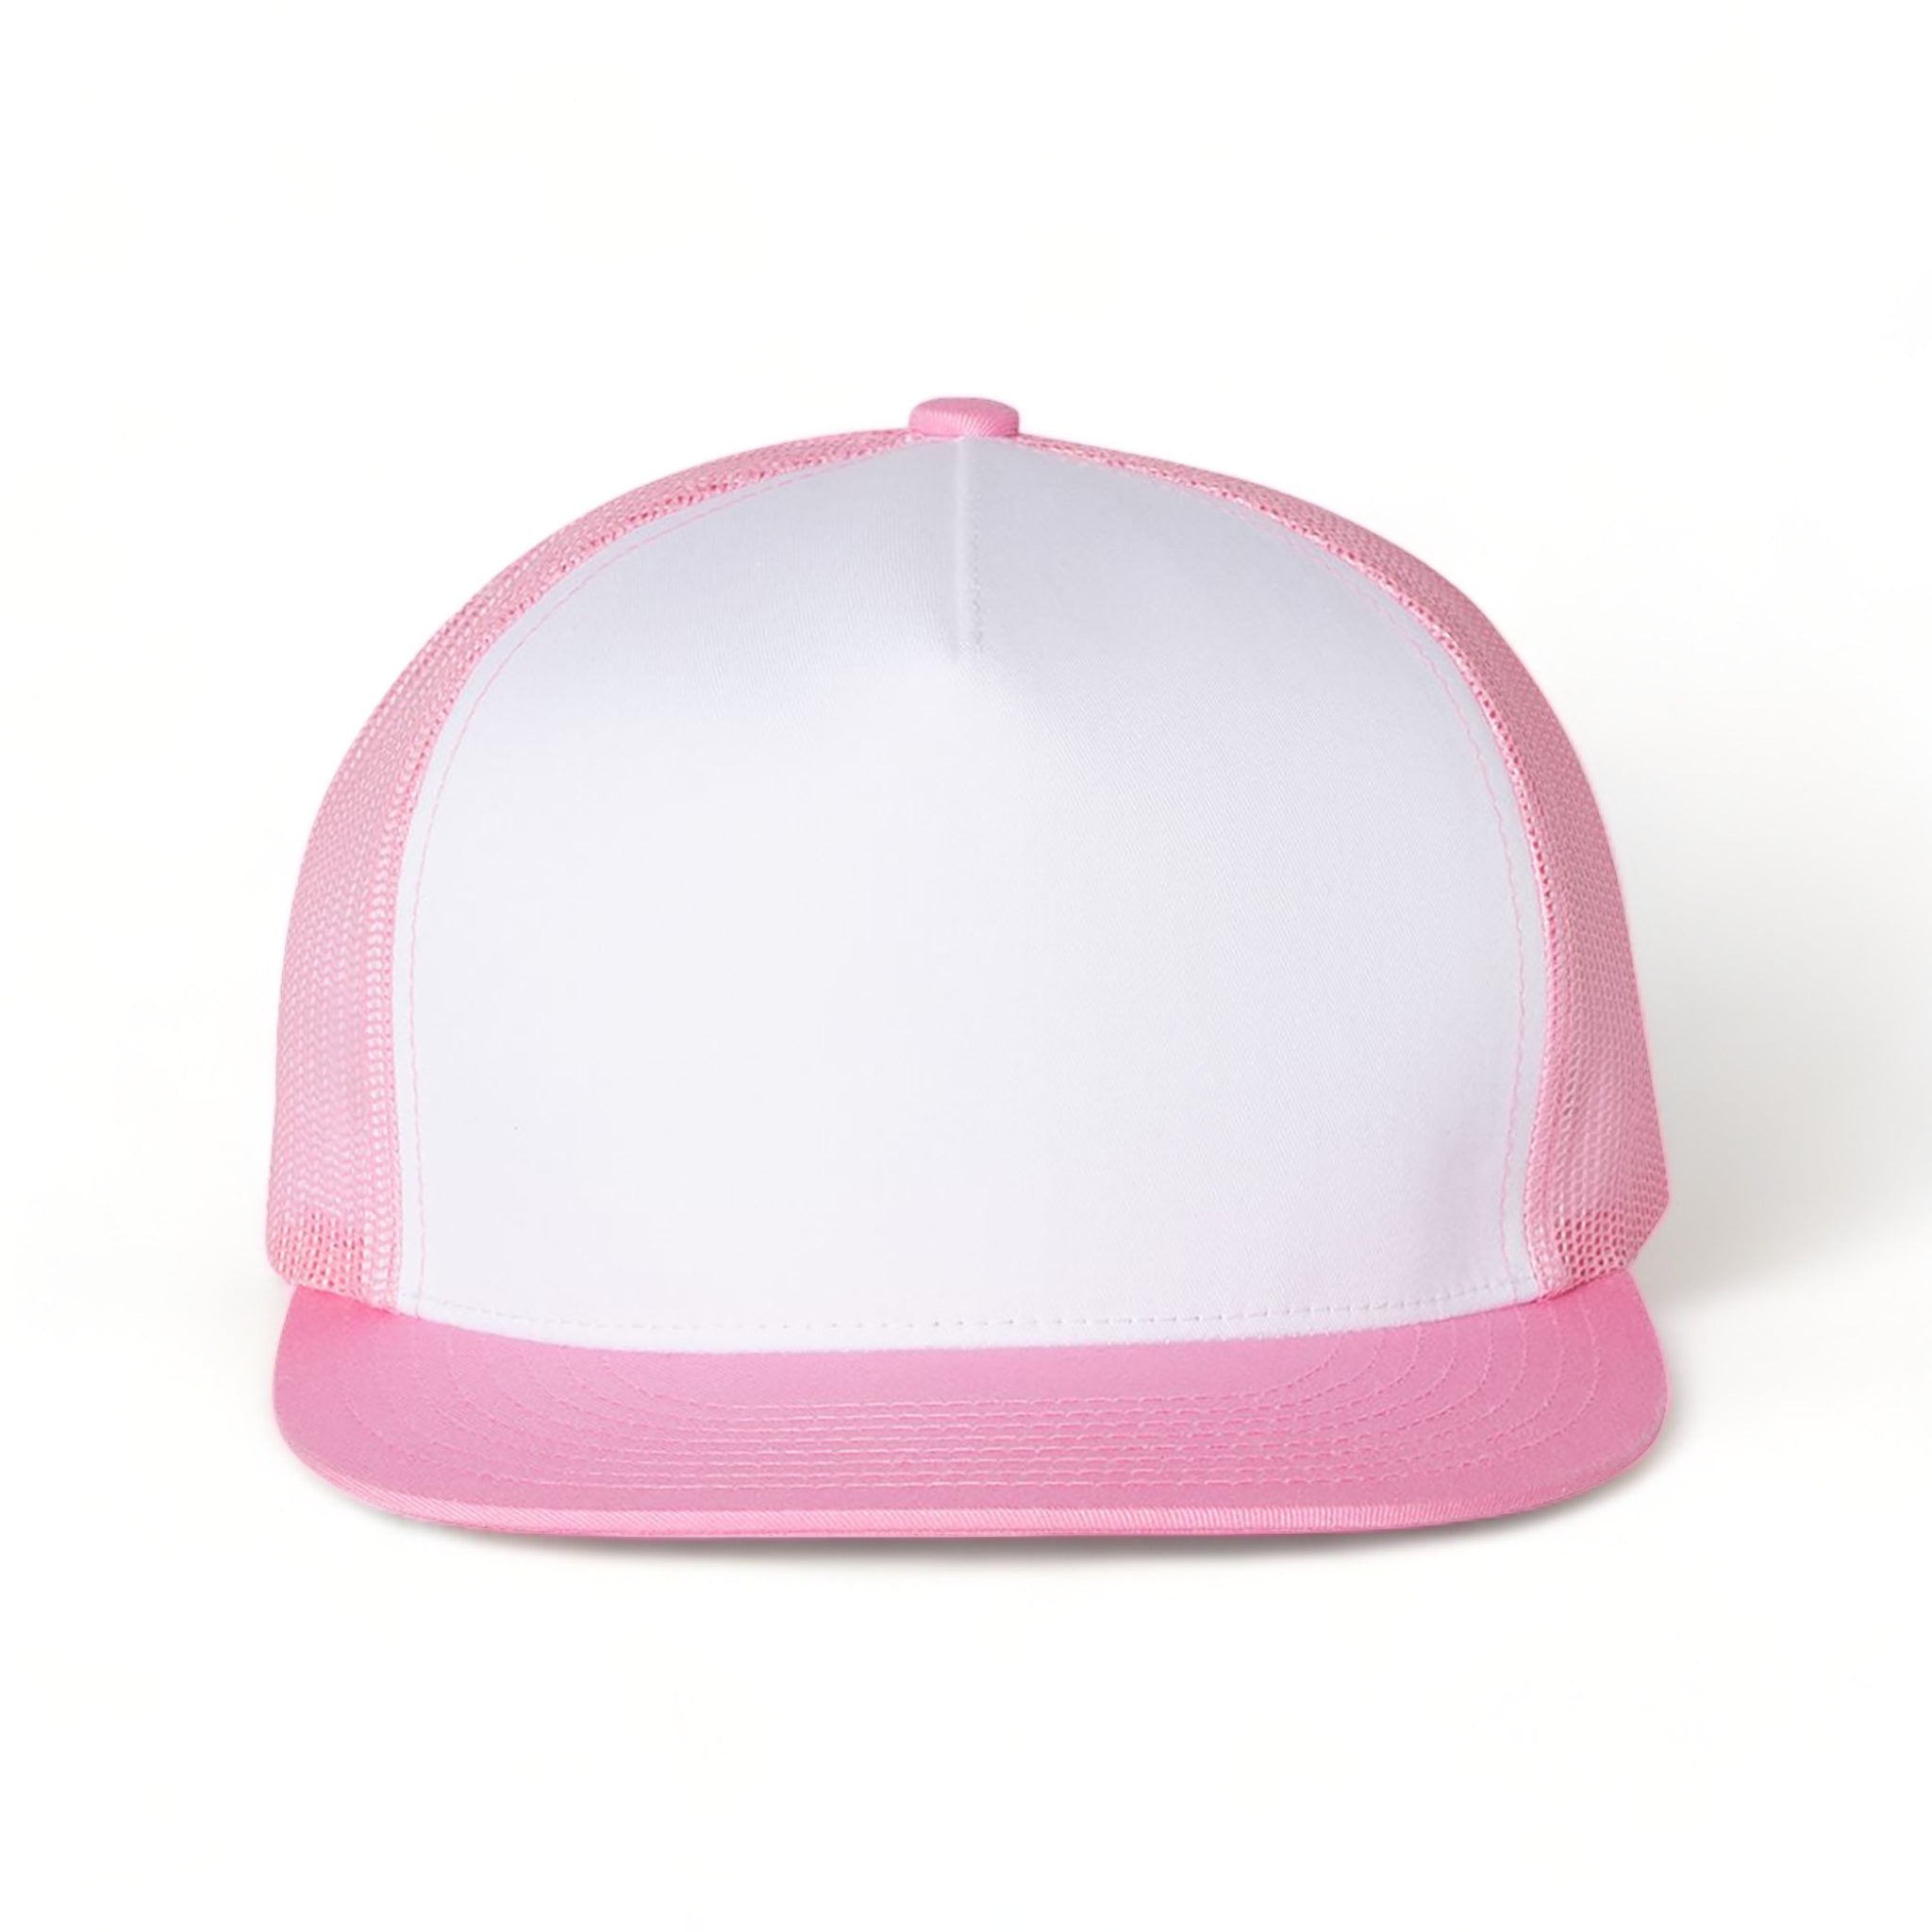 Front view of YP Classics 6006 custom hat in pink, white and pink